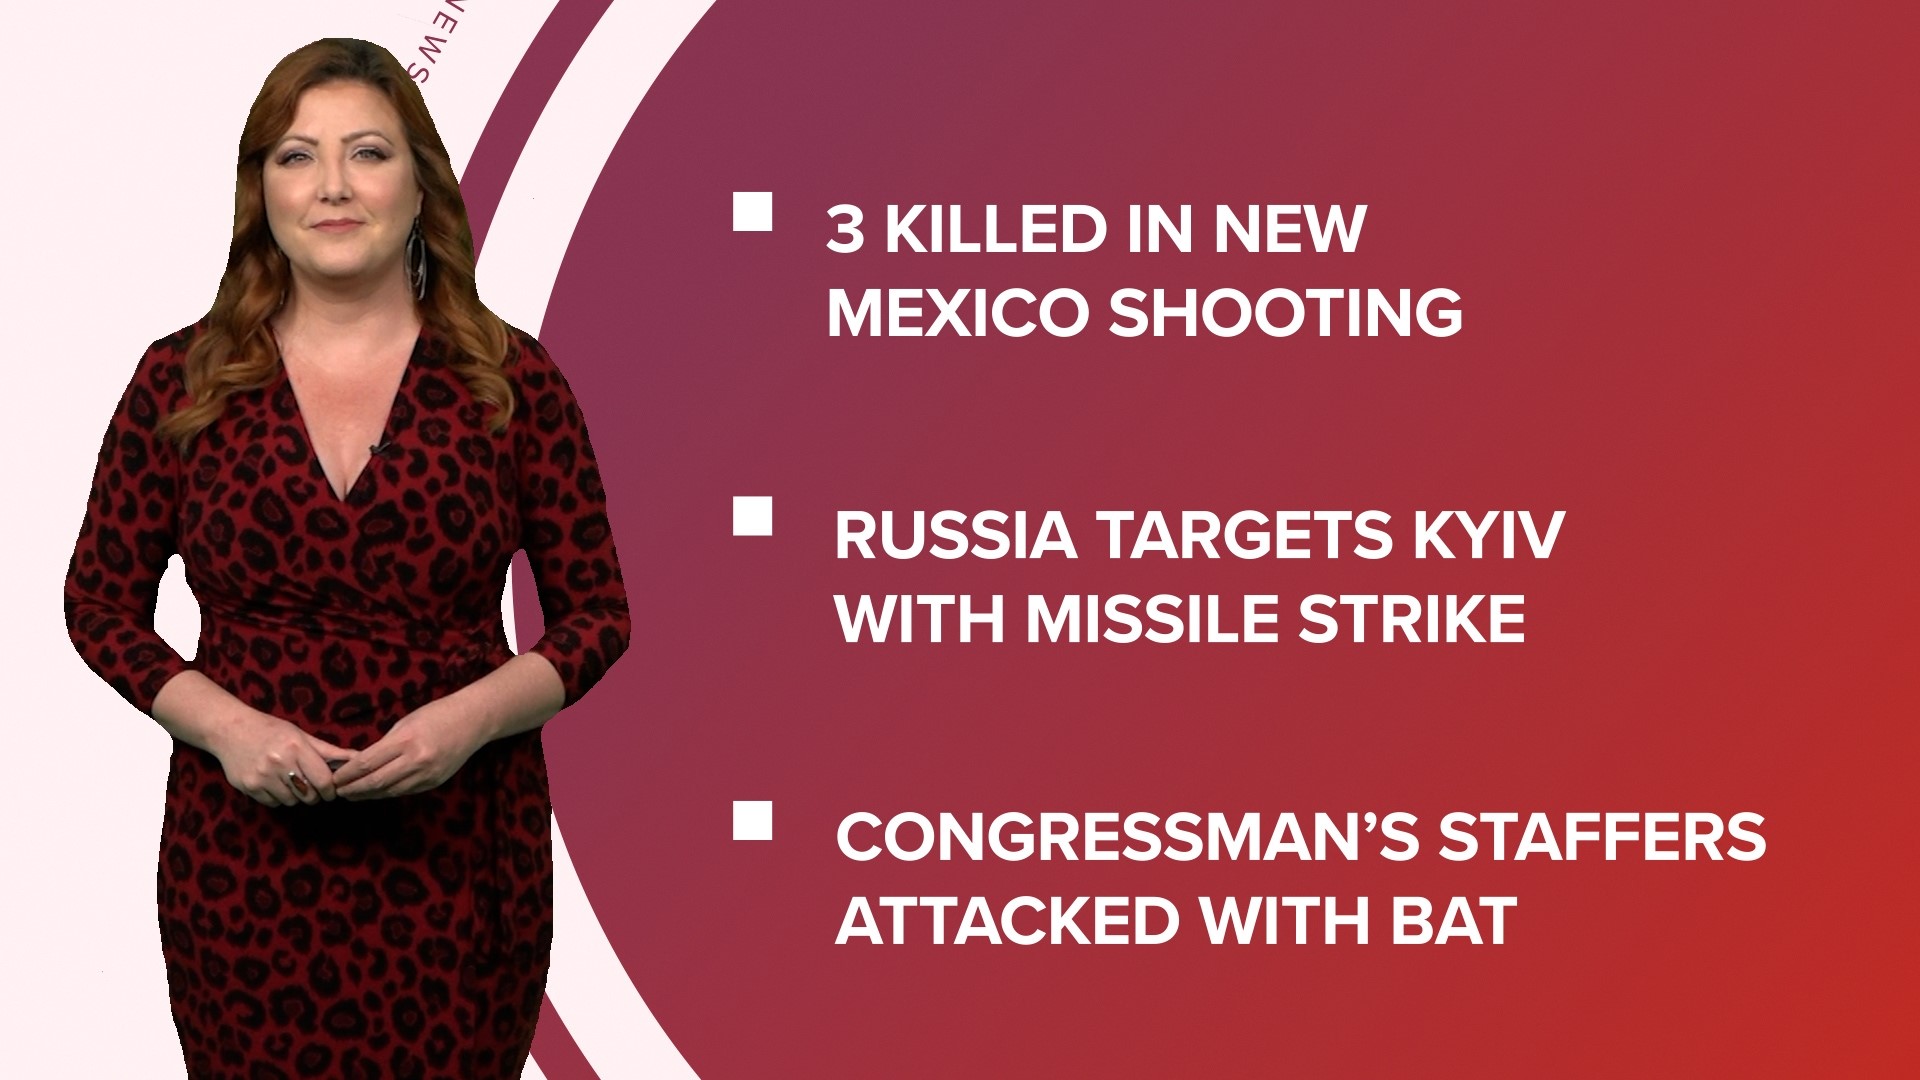 A look at what is happening in the news from a deadly shooting in New Mexico to a congressman's staffers attacked and a bill to improve concert ticket sales.